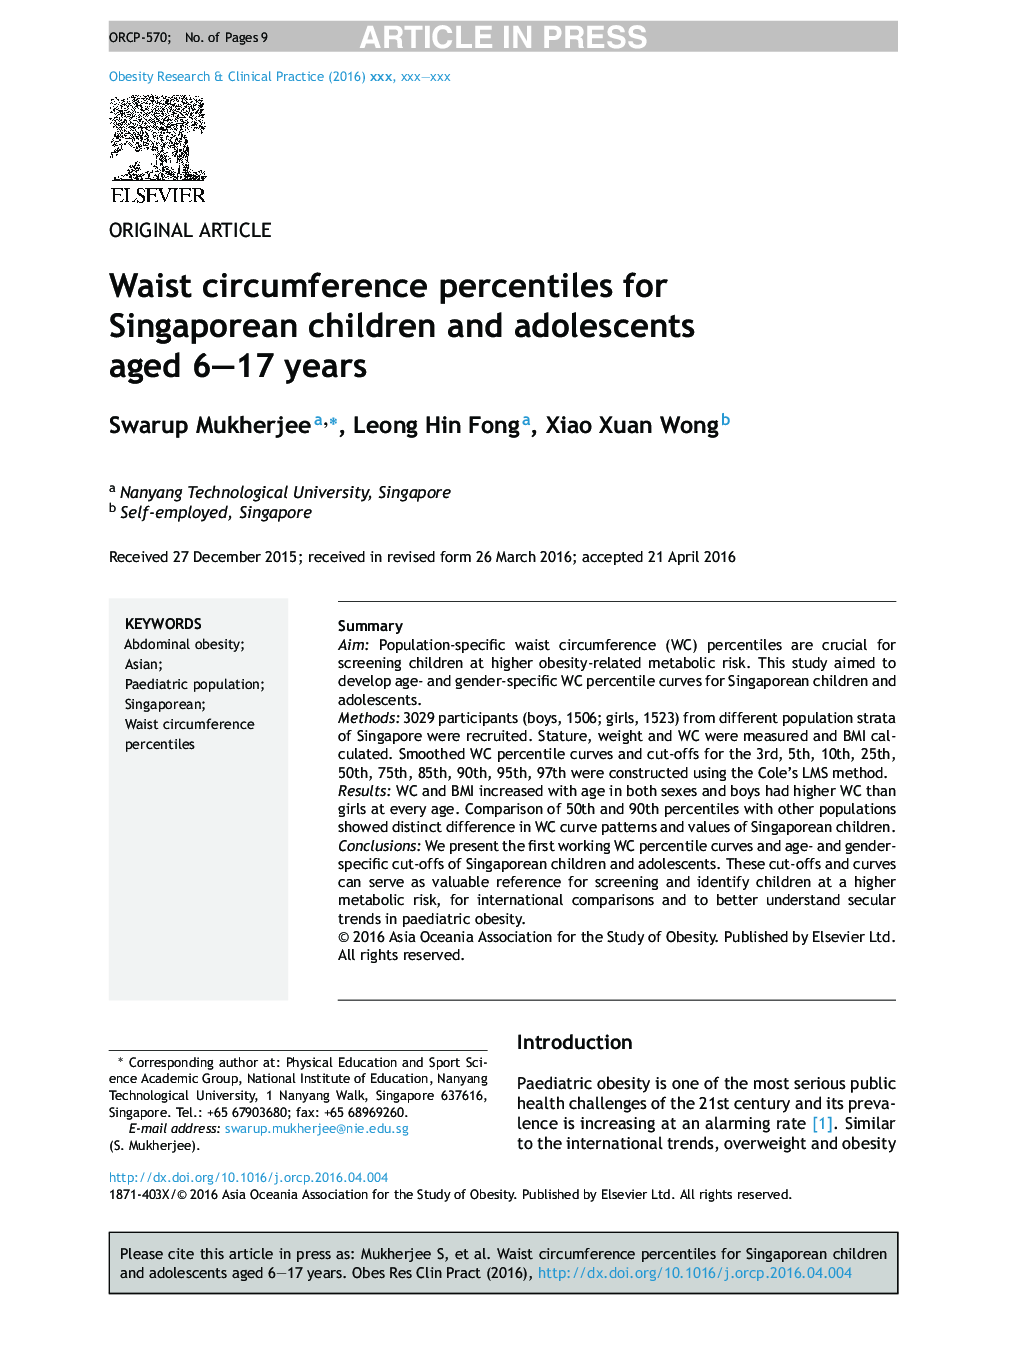 Waist circumference percentiles for Singaporean children and adolescents aged 6-17 years